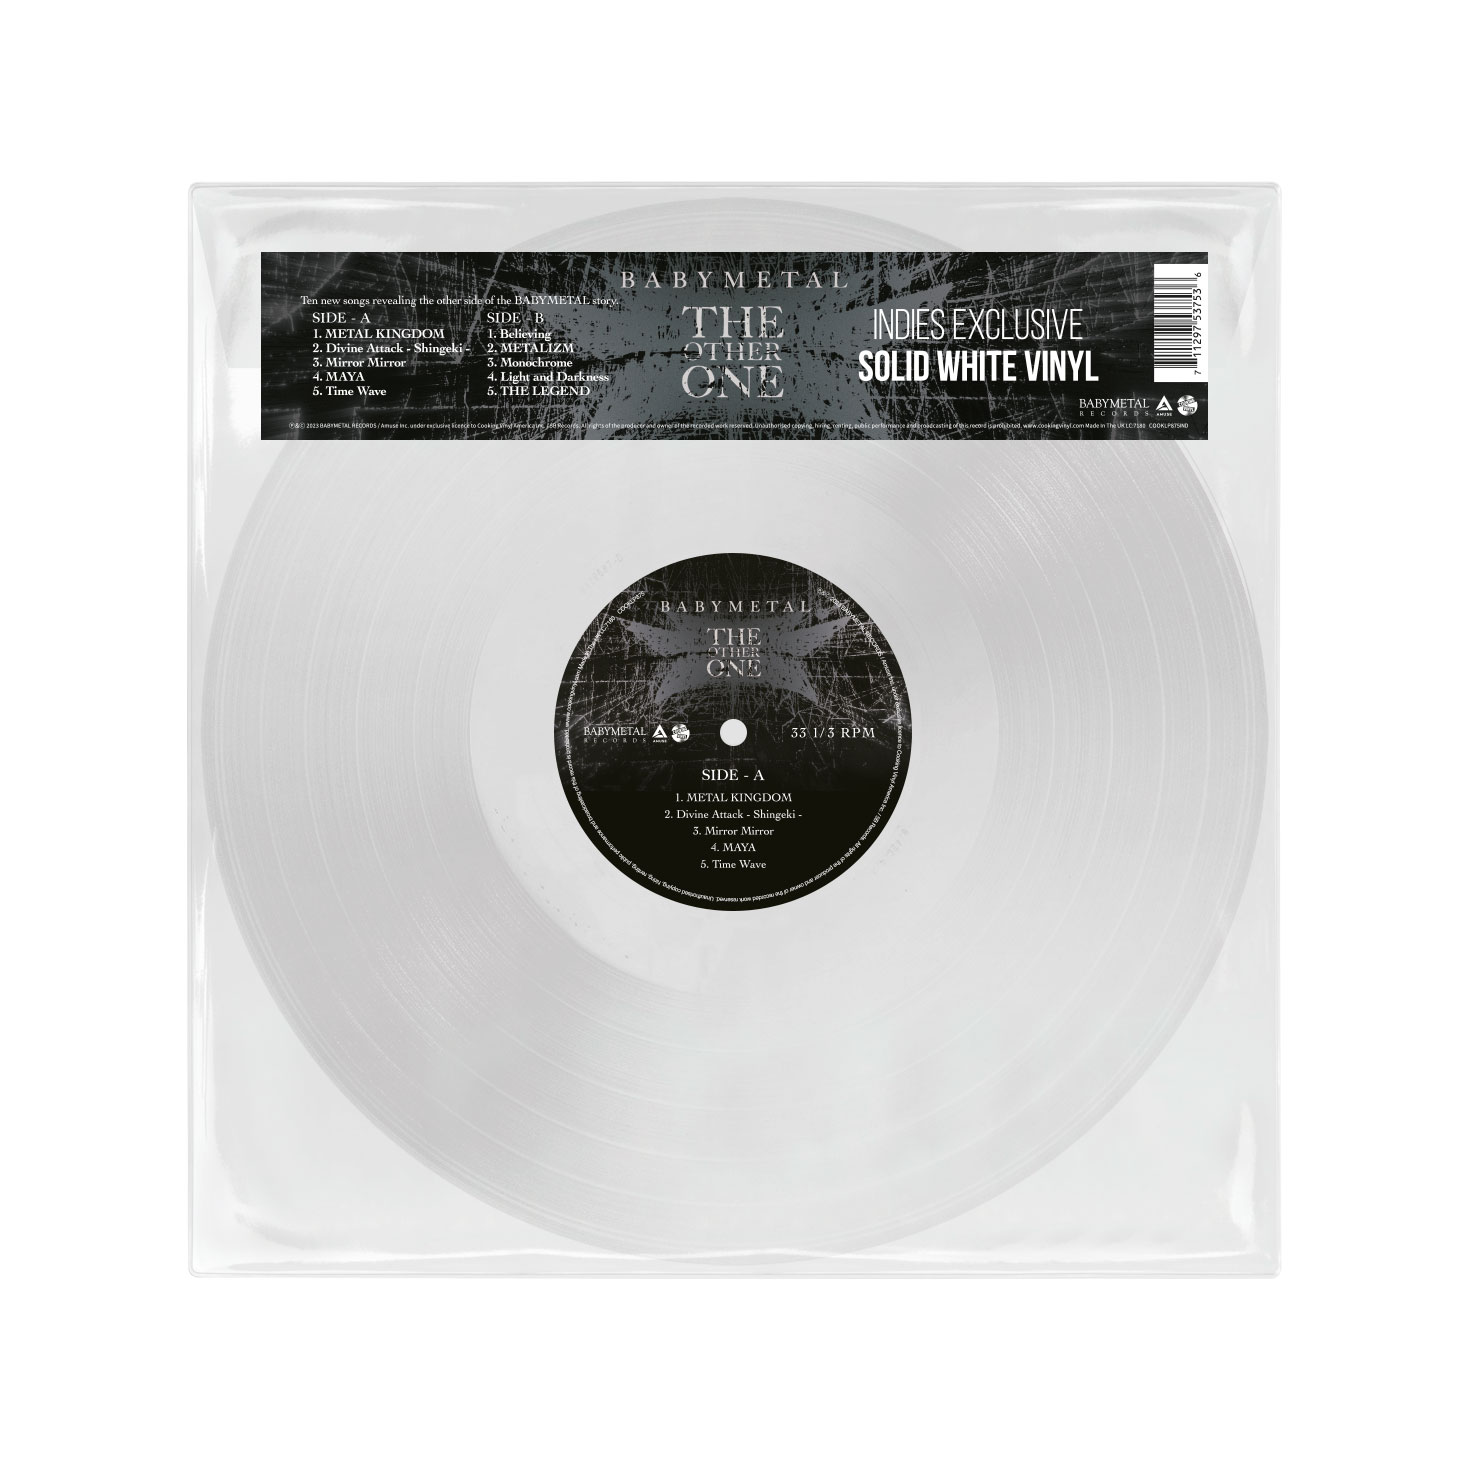 BABYMETAL - The Other One (Indie Exclusive Limited Edition Solid White Vinyl)